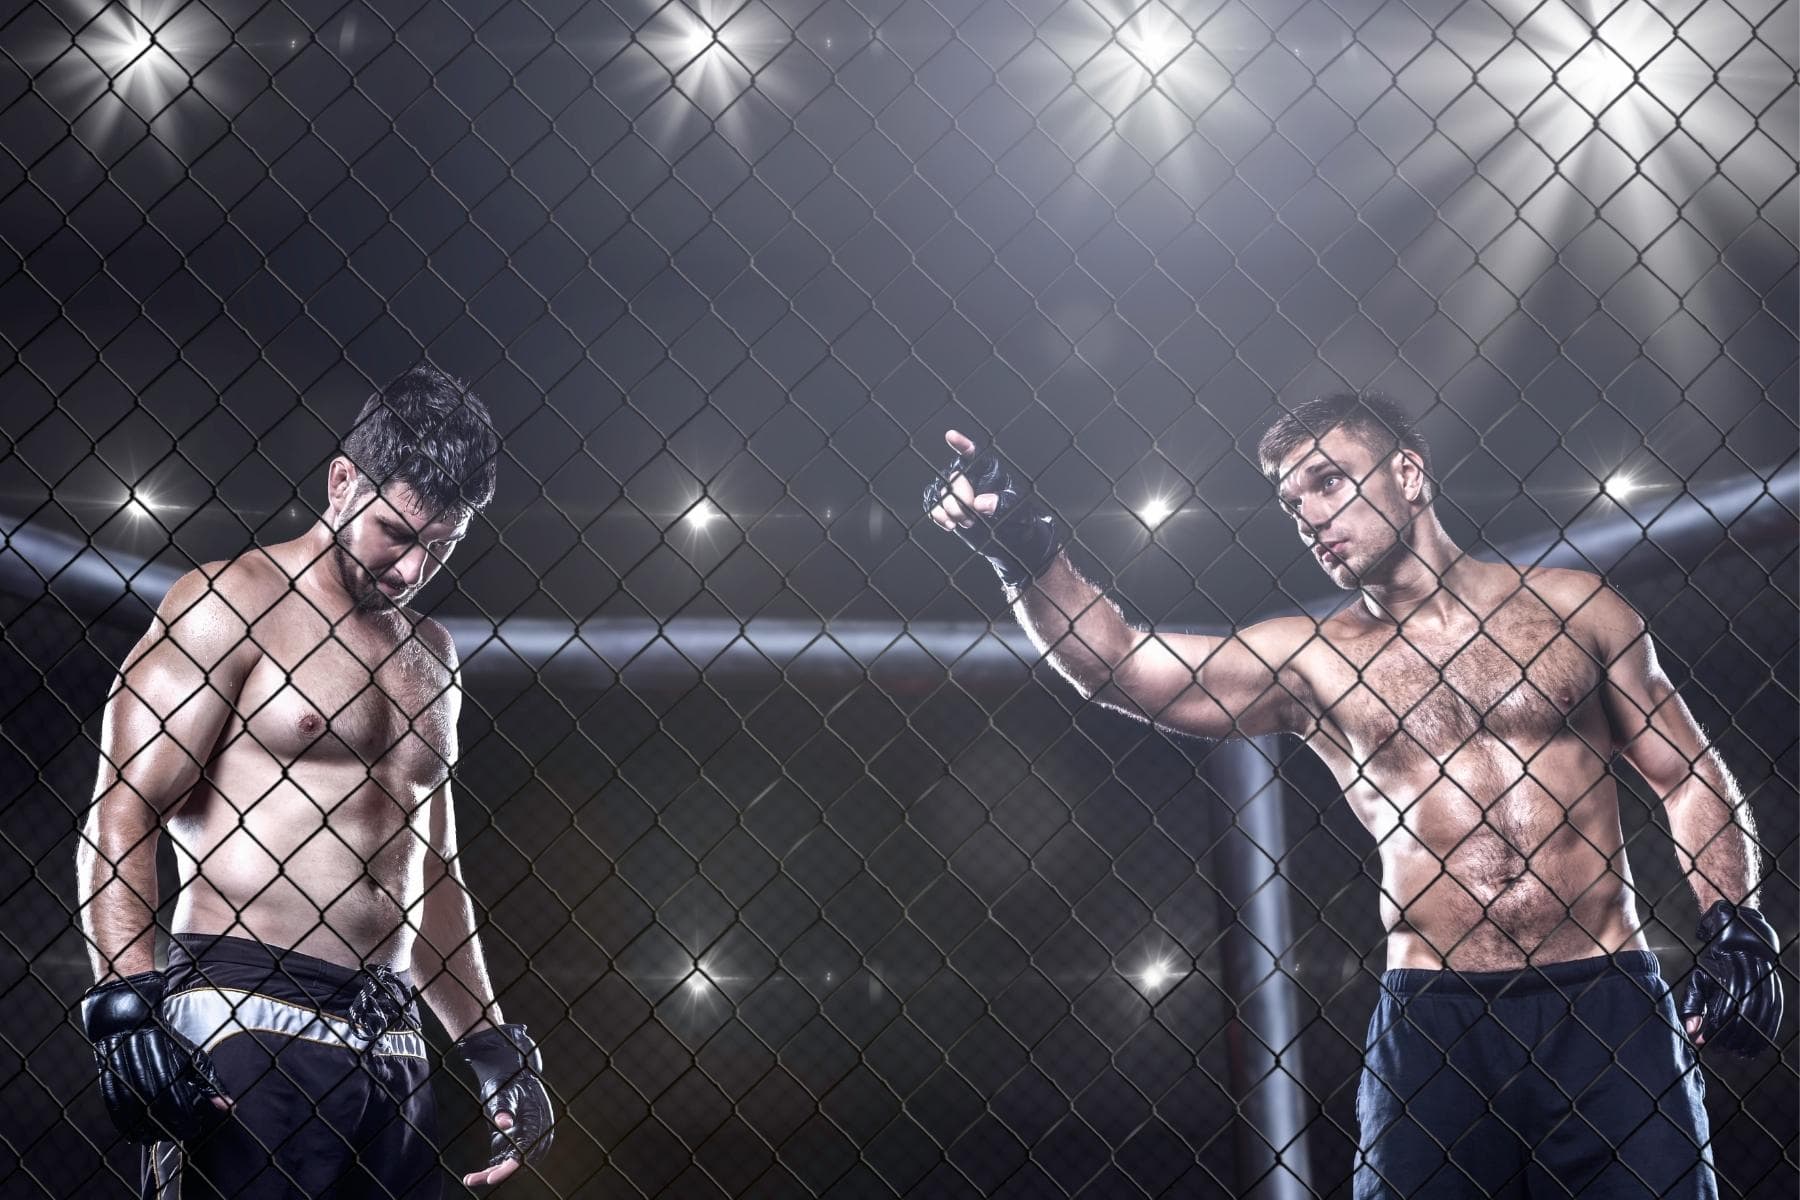 two mma fighter in cage